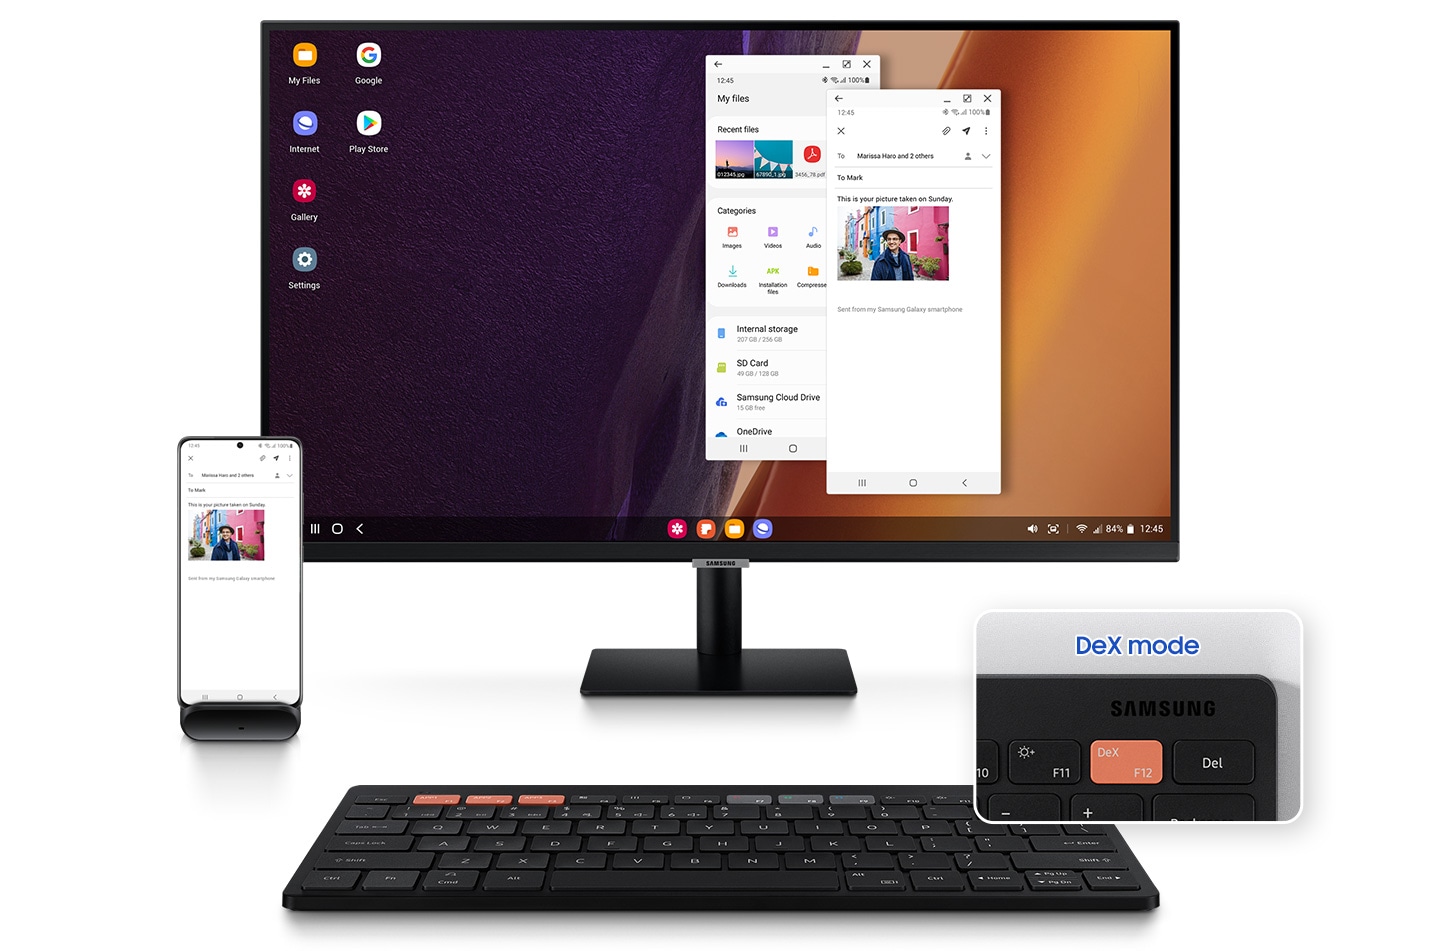 There is a black-colored Samsung Smart Keyboard Trio 500 and a monitor above the keyboard on which there are two apps that appear to be opened; one is an email app and the other one is a picture list app. Beside a monitor, there is a smartphone placed on a phone holder, where the same email app is opened. 'DeX mode' key button which allows the user to access DeX mode by pressing the F12 button on the keyboard is highlighted on the bottom right side.